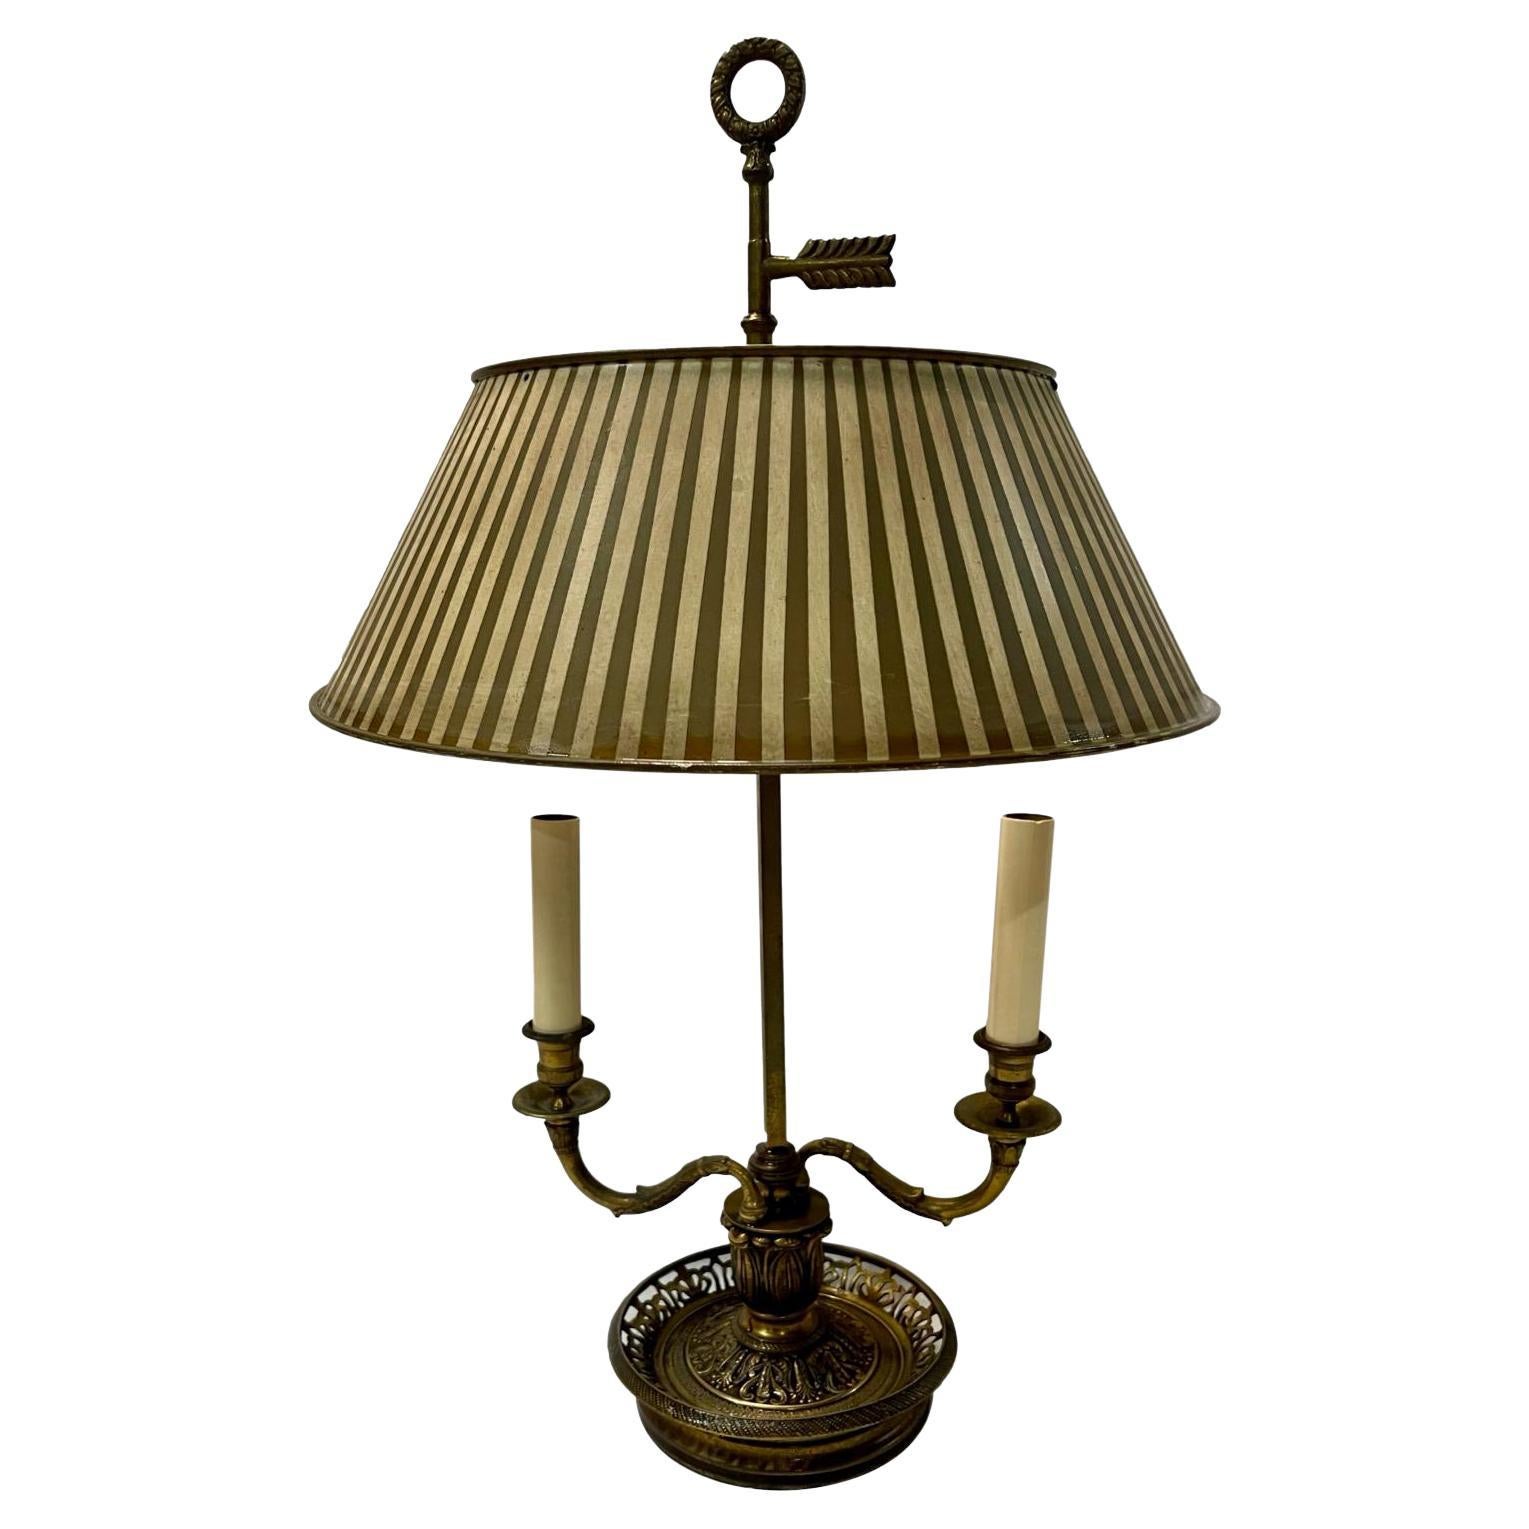 French Desk Lamp with Tole Shade